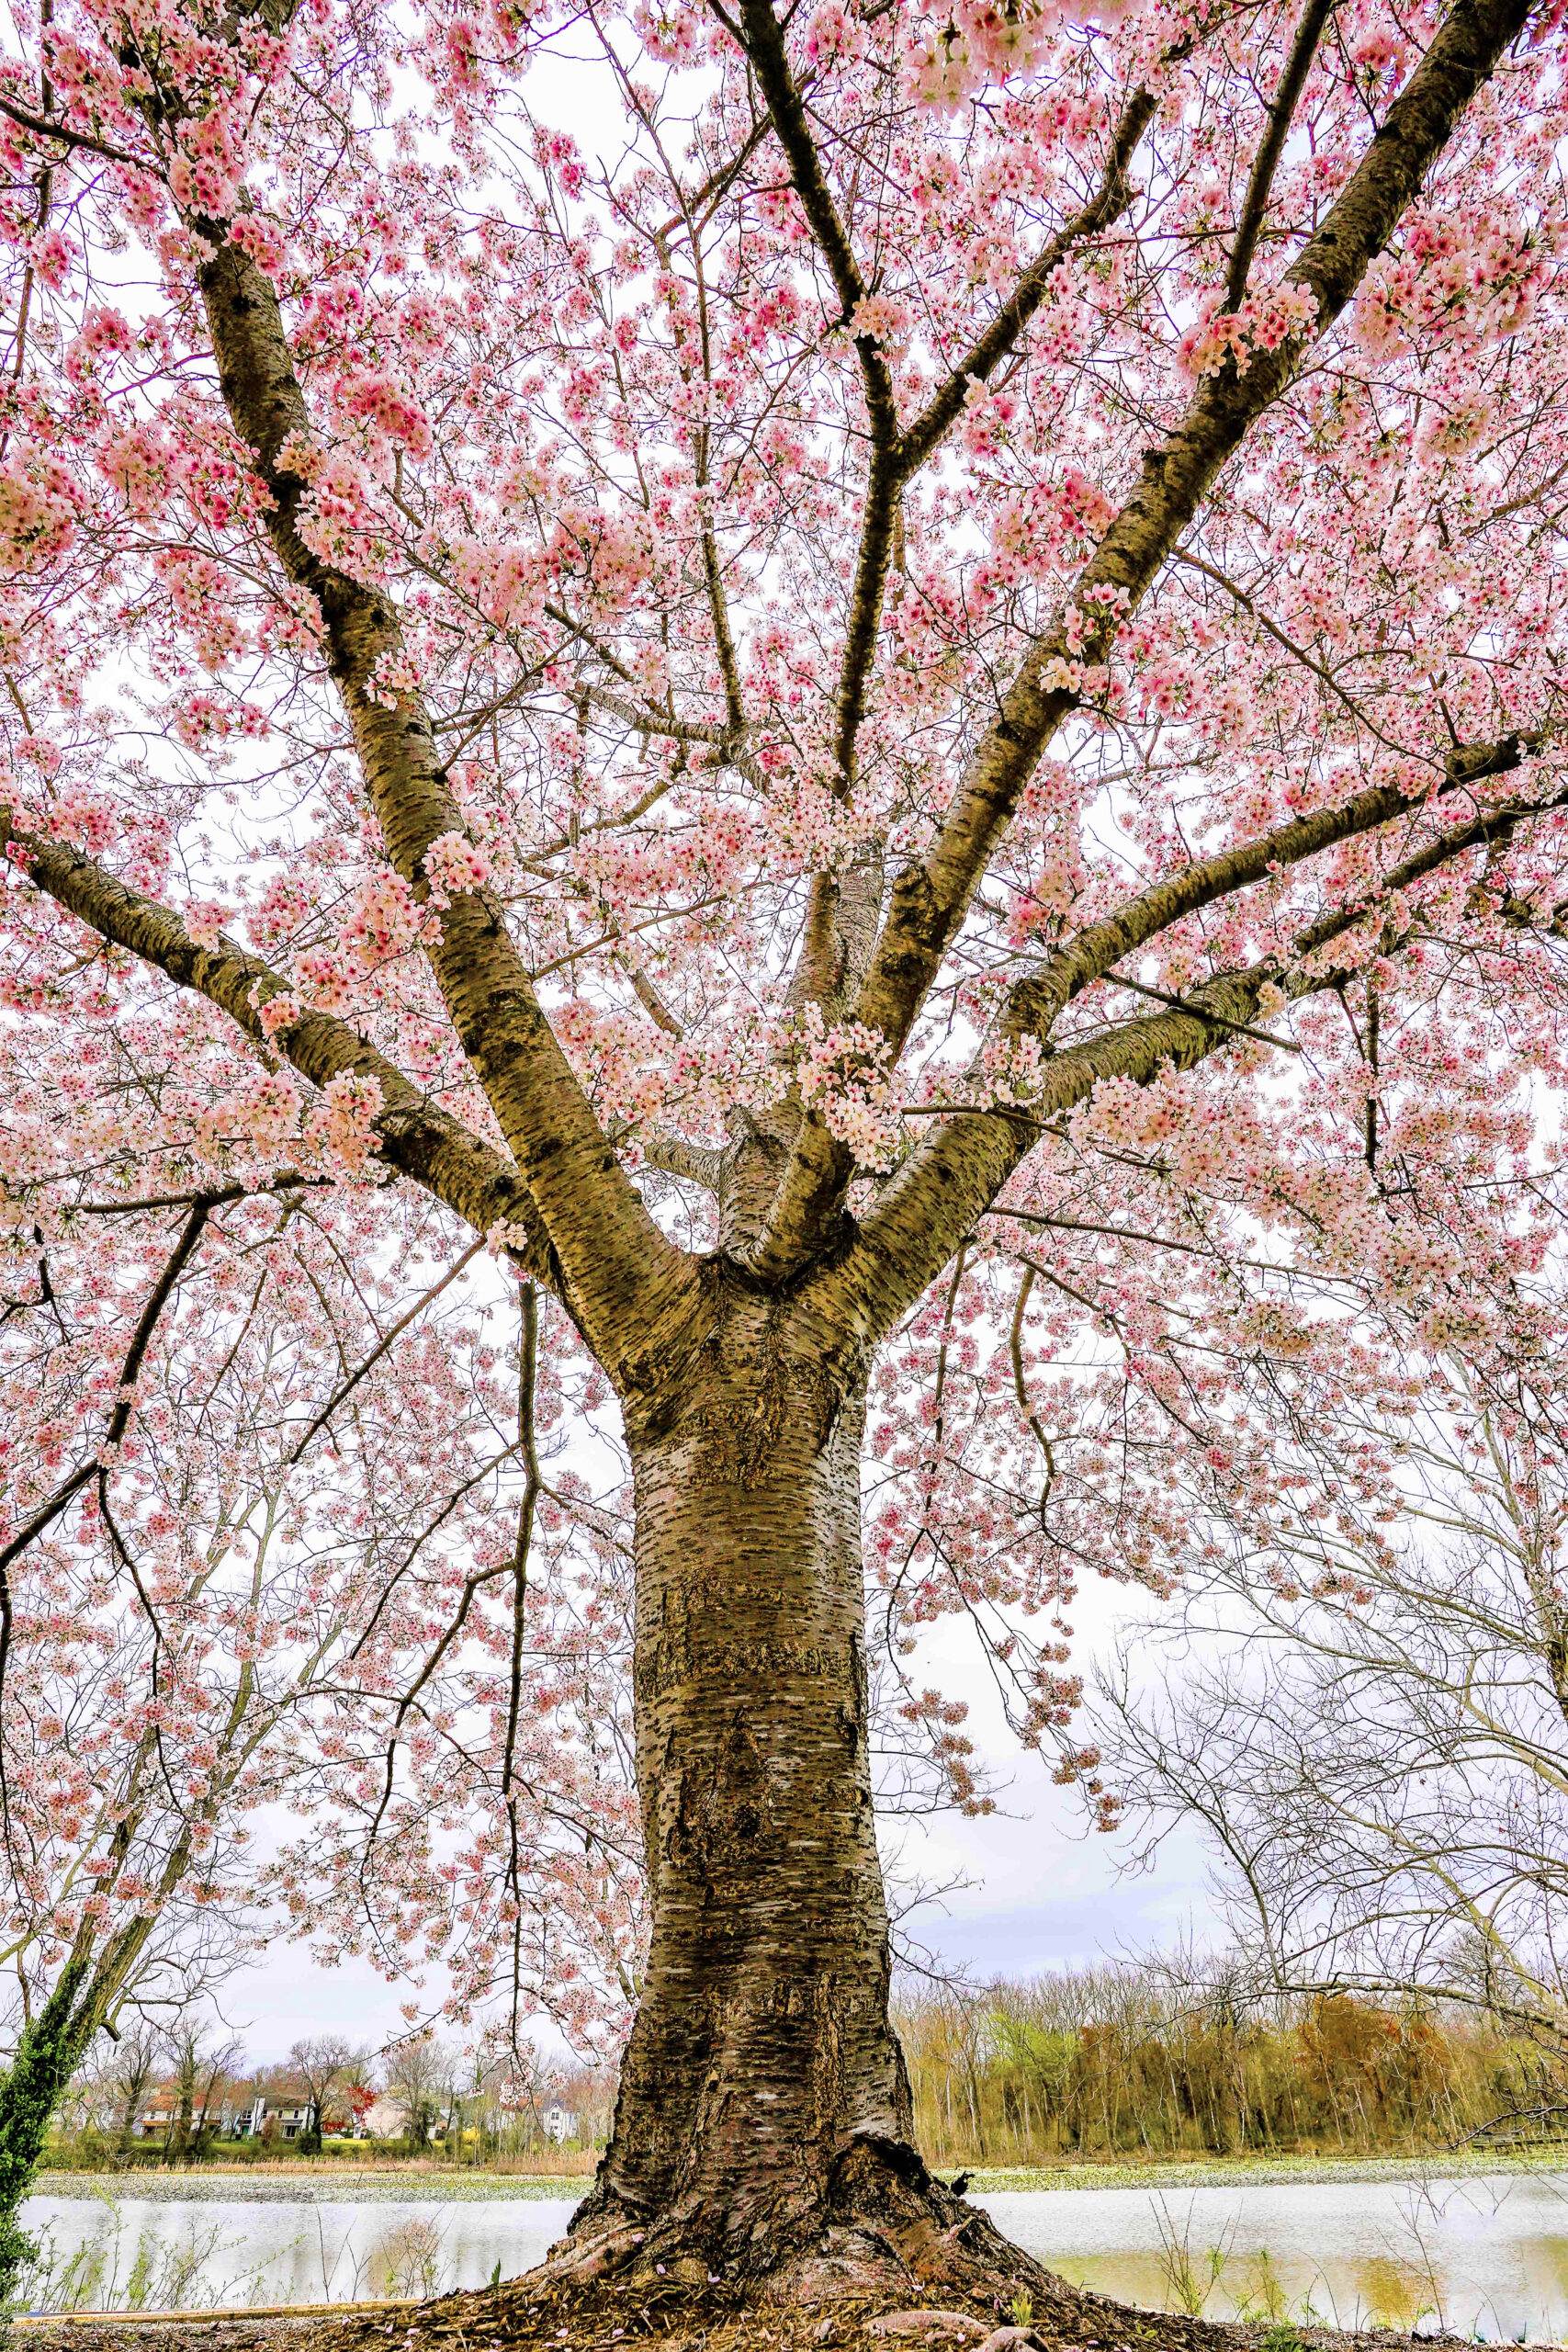 Spring blossoms on a cherry tree